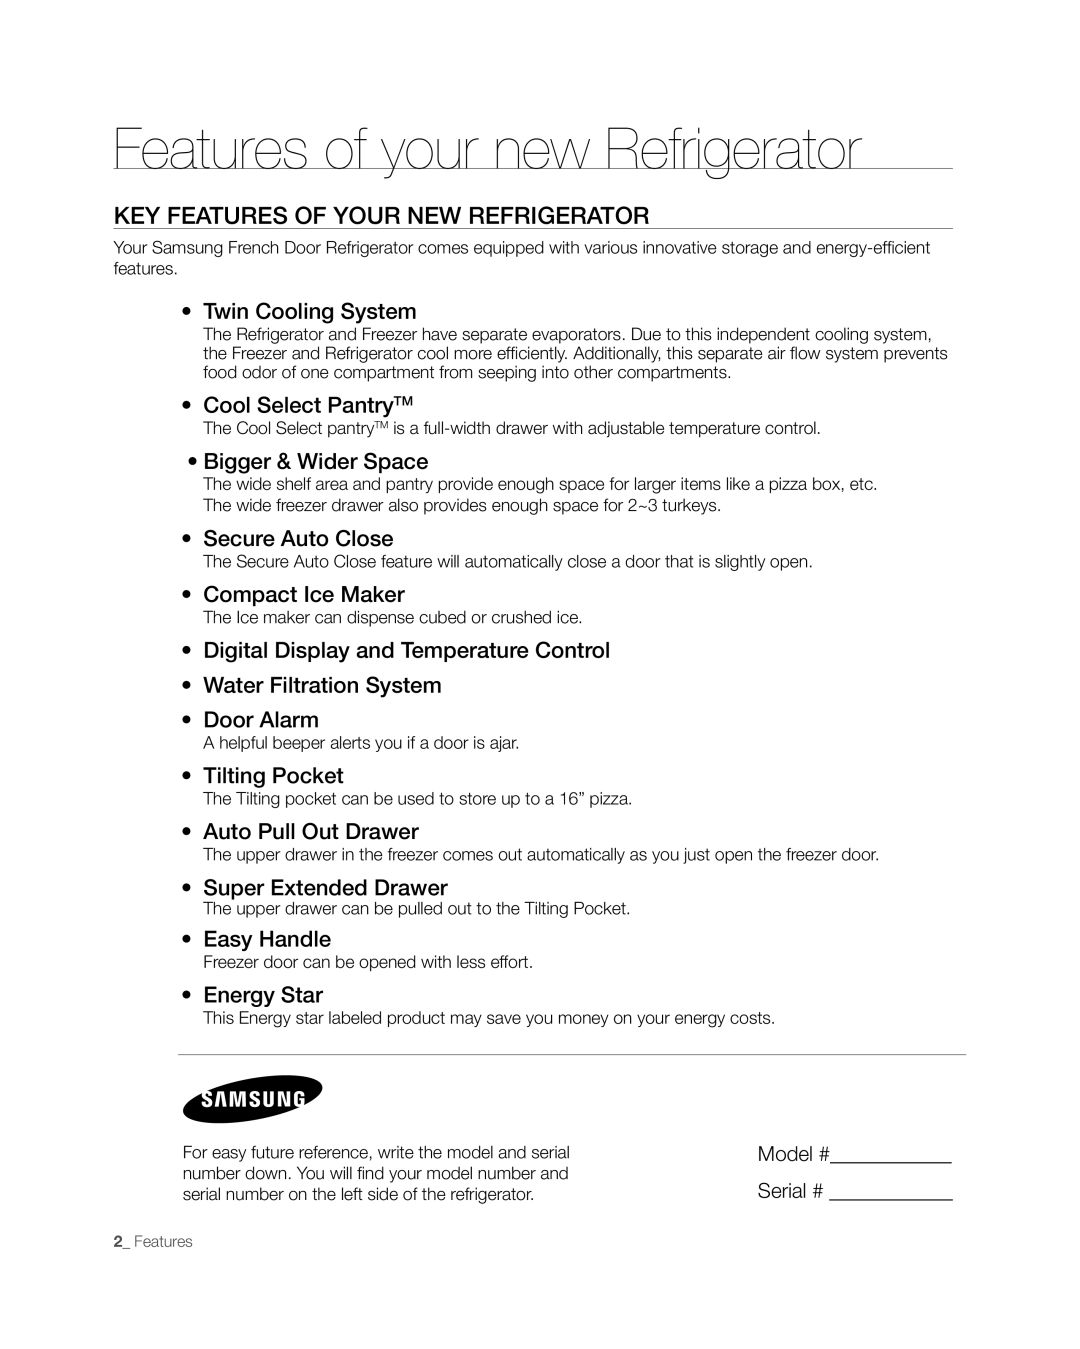 Samsung RFG297AAWP user manual Features of your new Refrigerator, Key features of your new refrigerator 